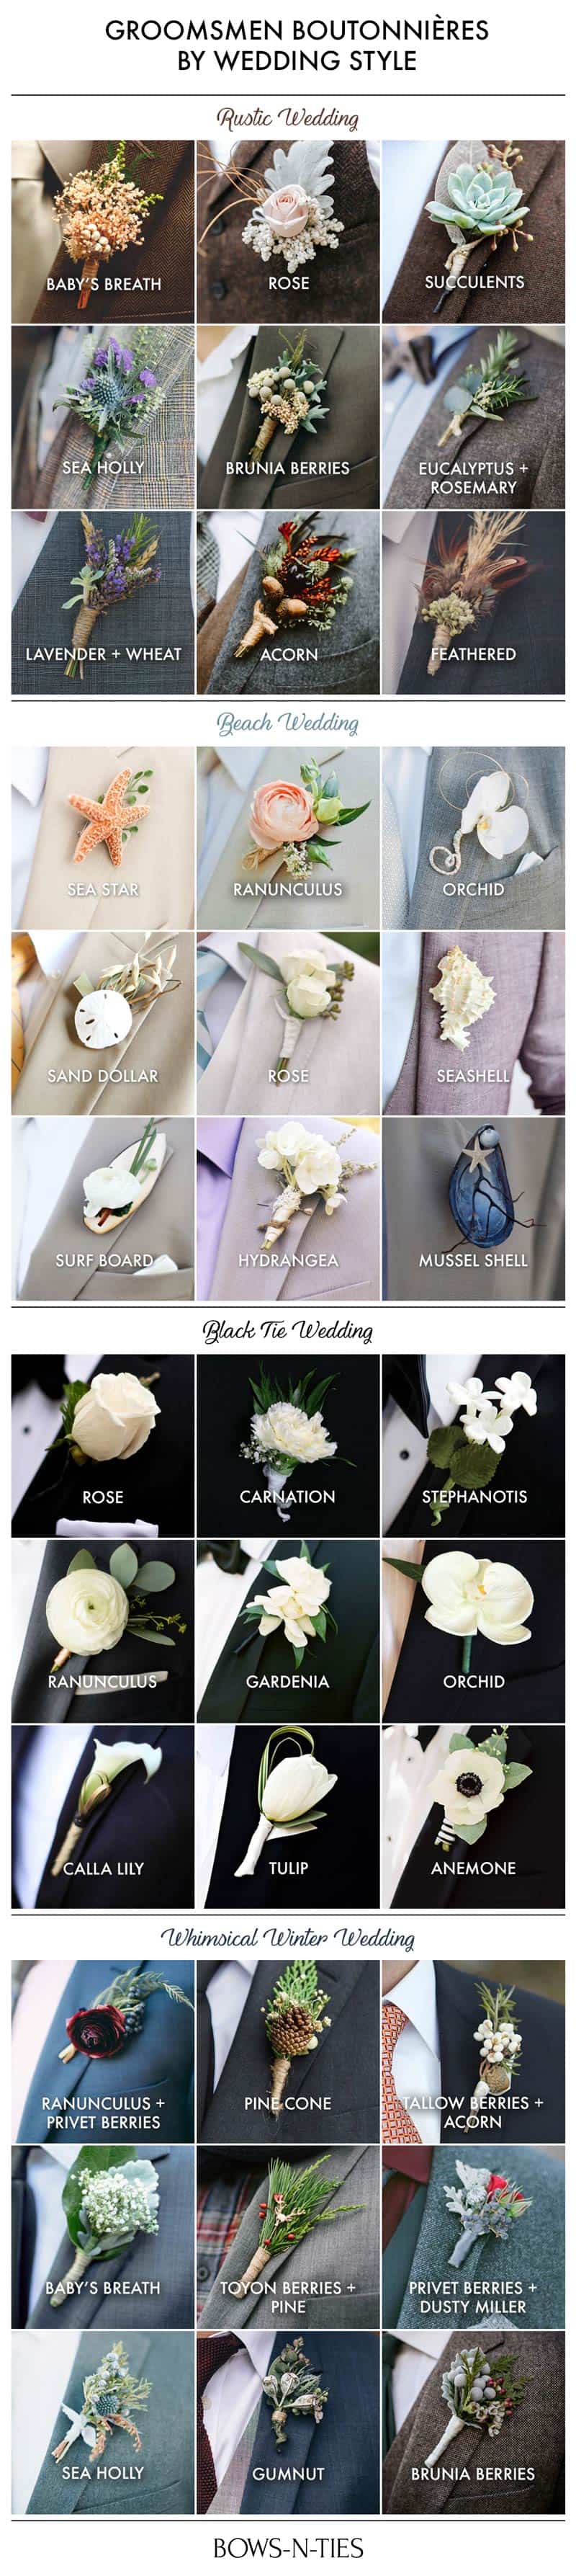 Boutonnieres_By_WeddingStyle